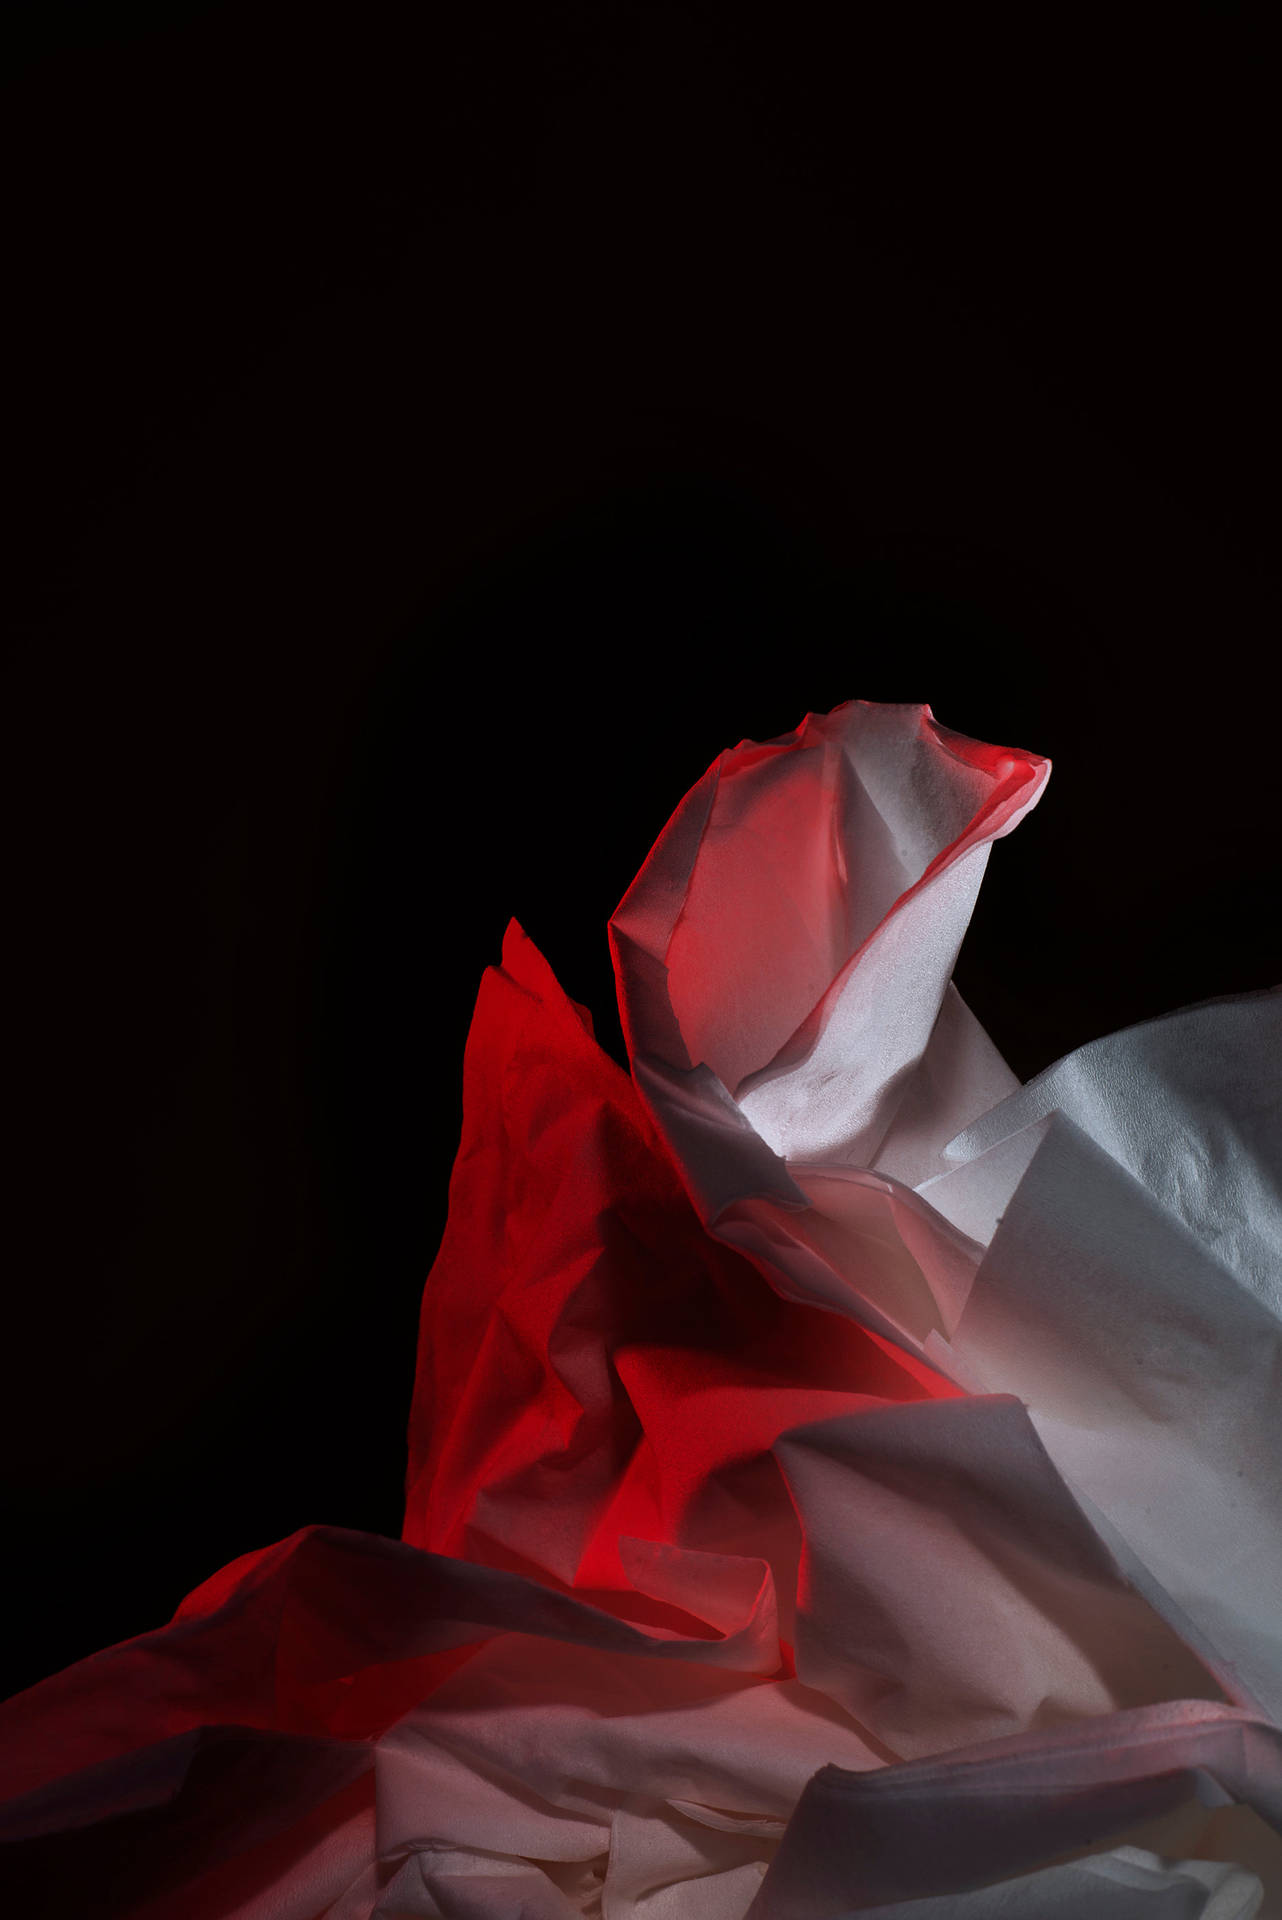 Red And White Tissue Light For Phone Background